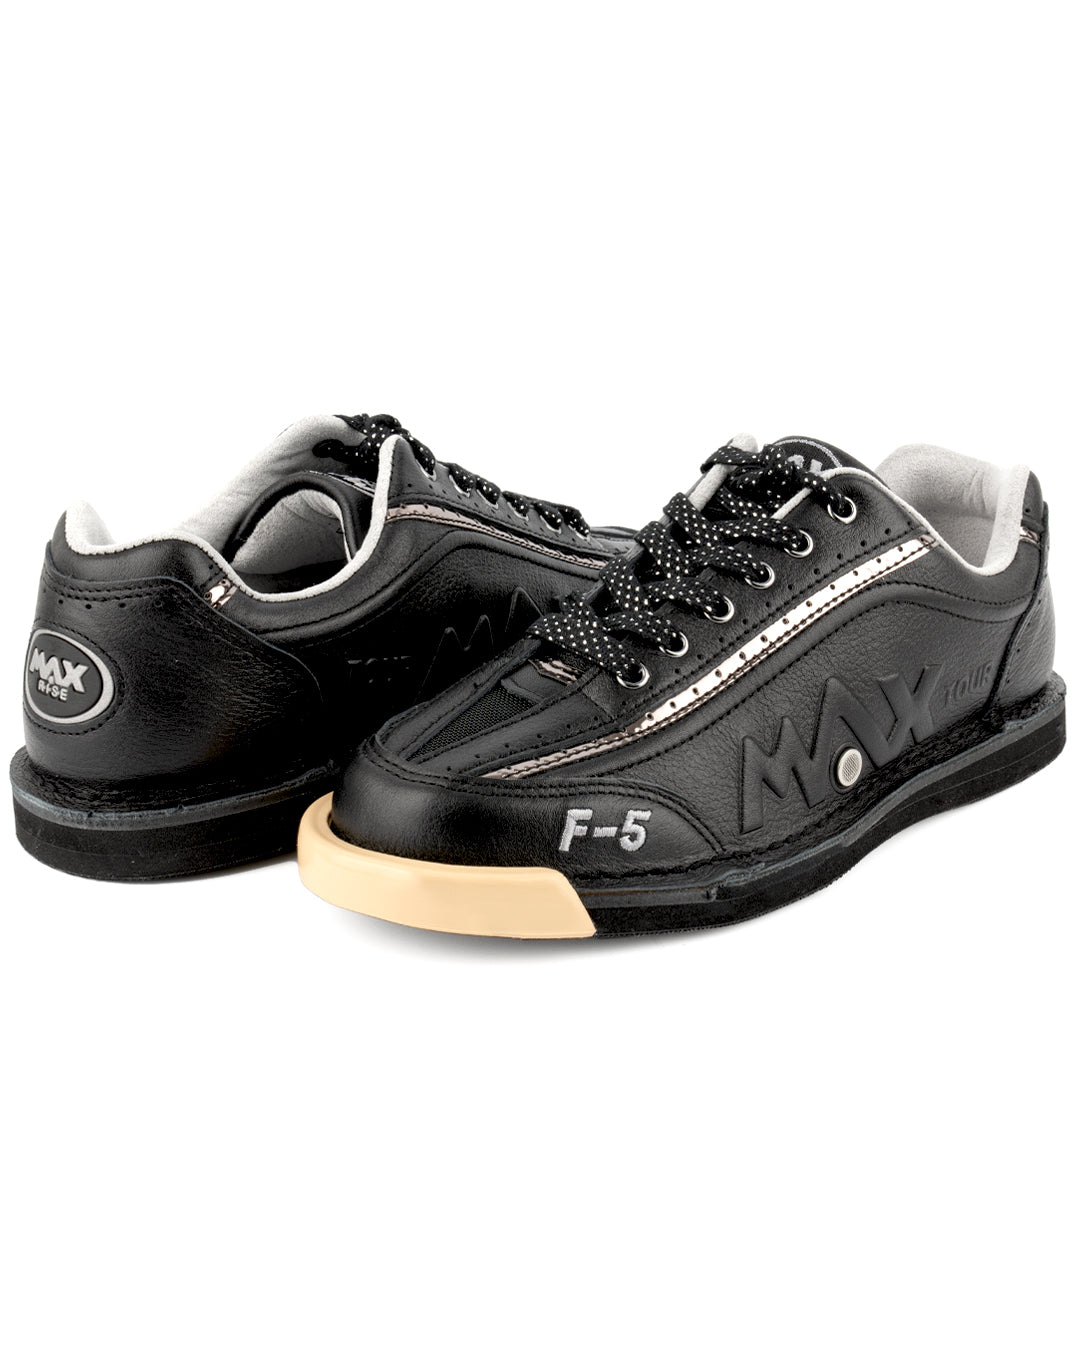 maxwelter f-5 bowling shoes black leather both